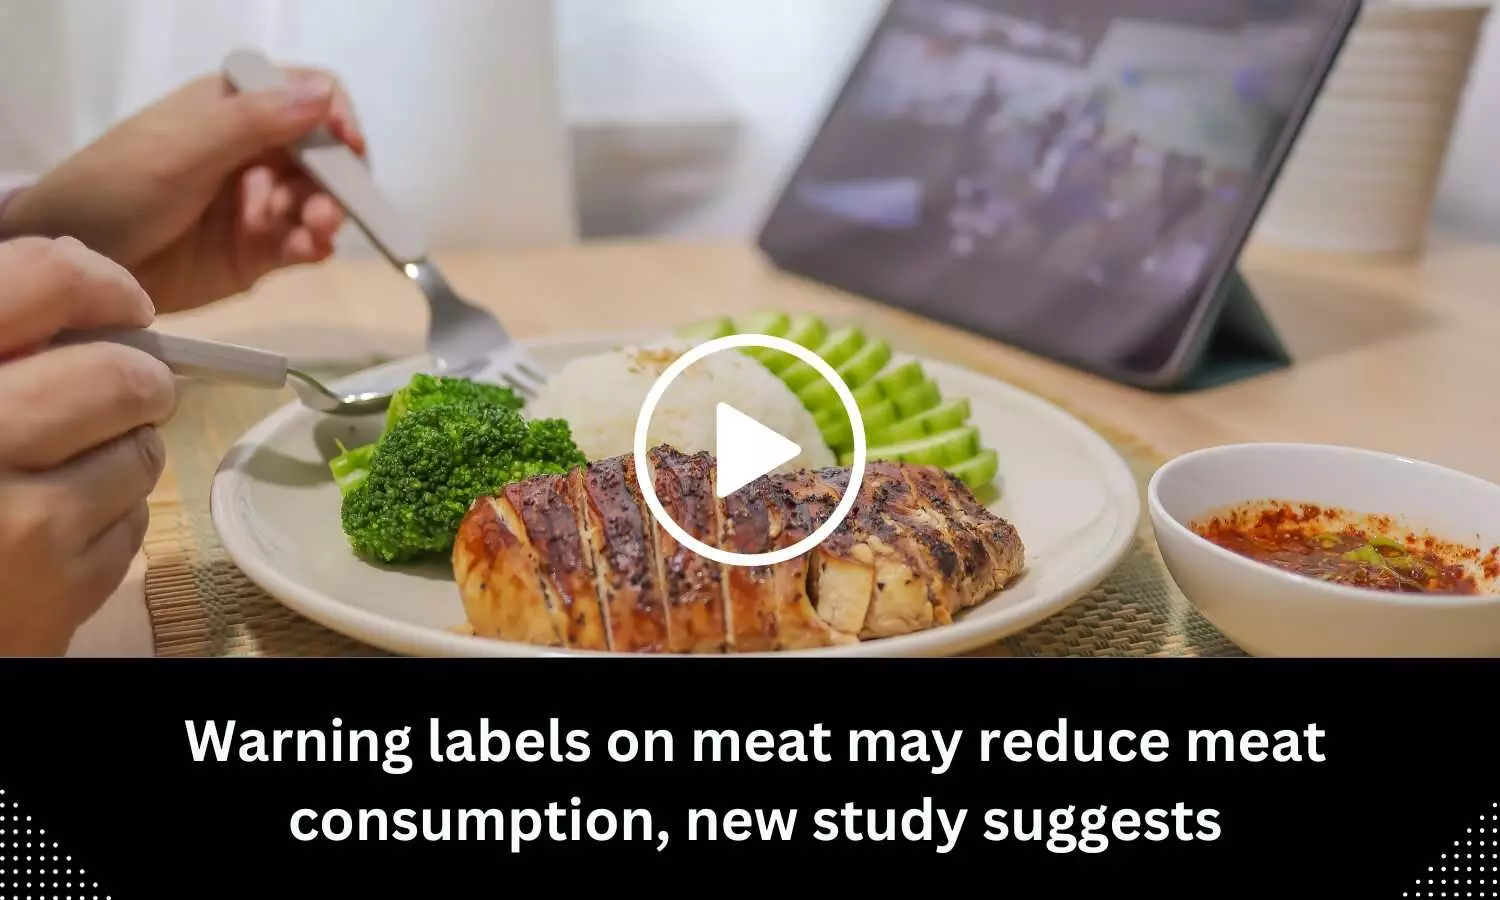 Warning labels on meat may reduce meat consumption, new study suggests